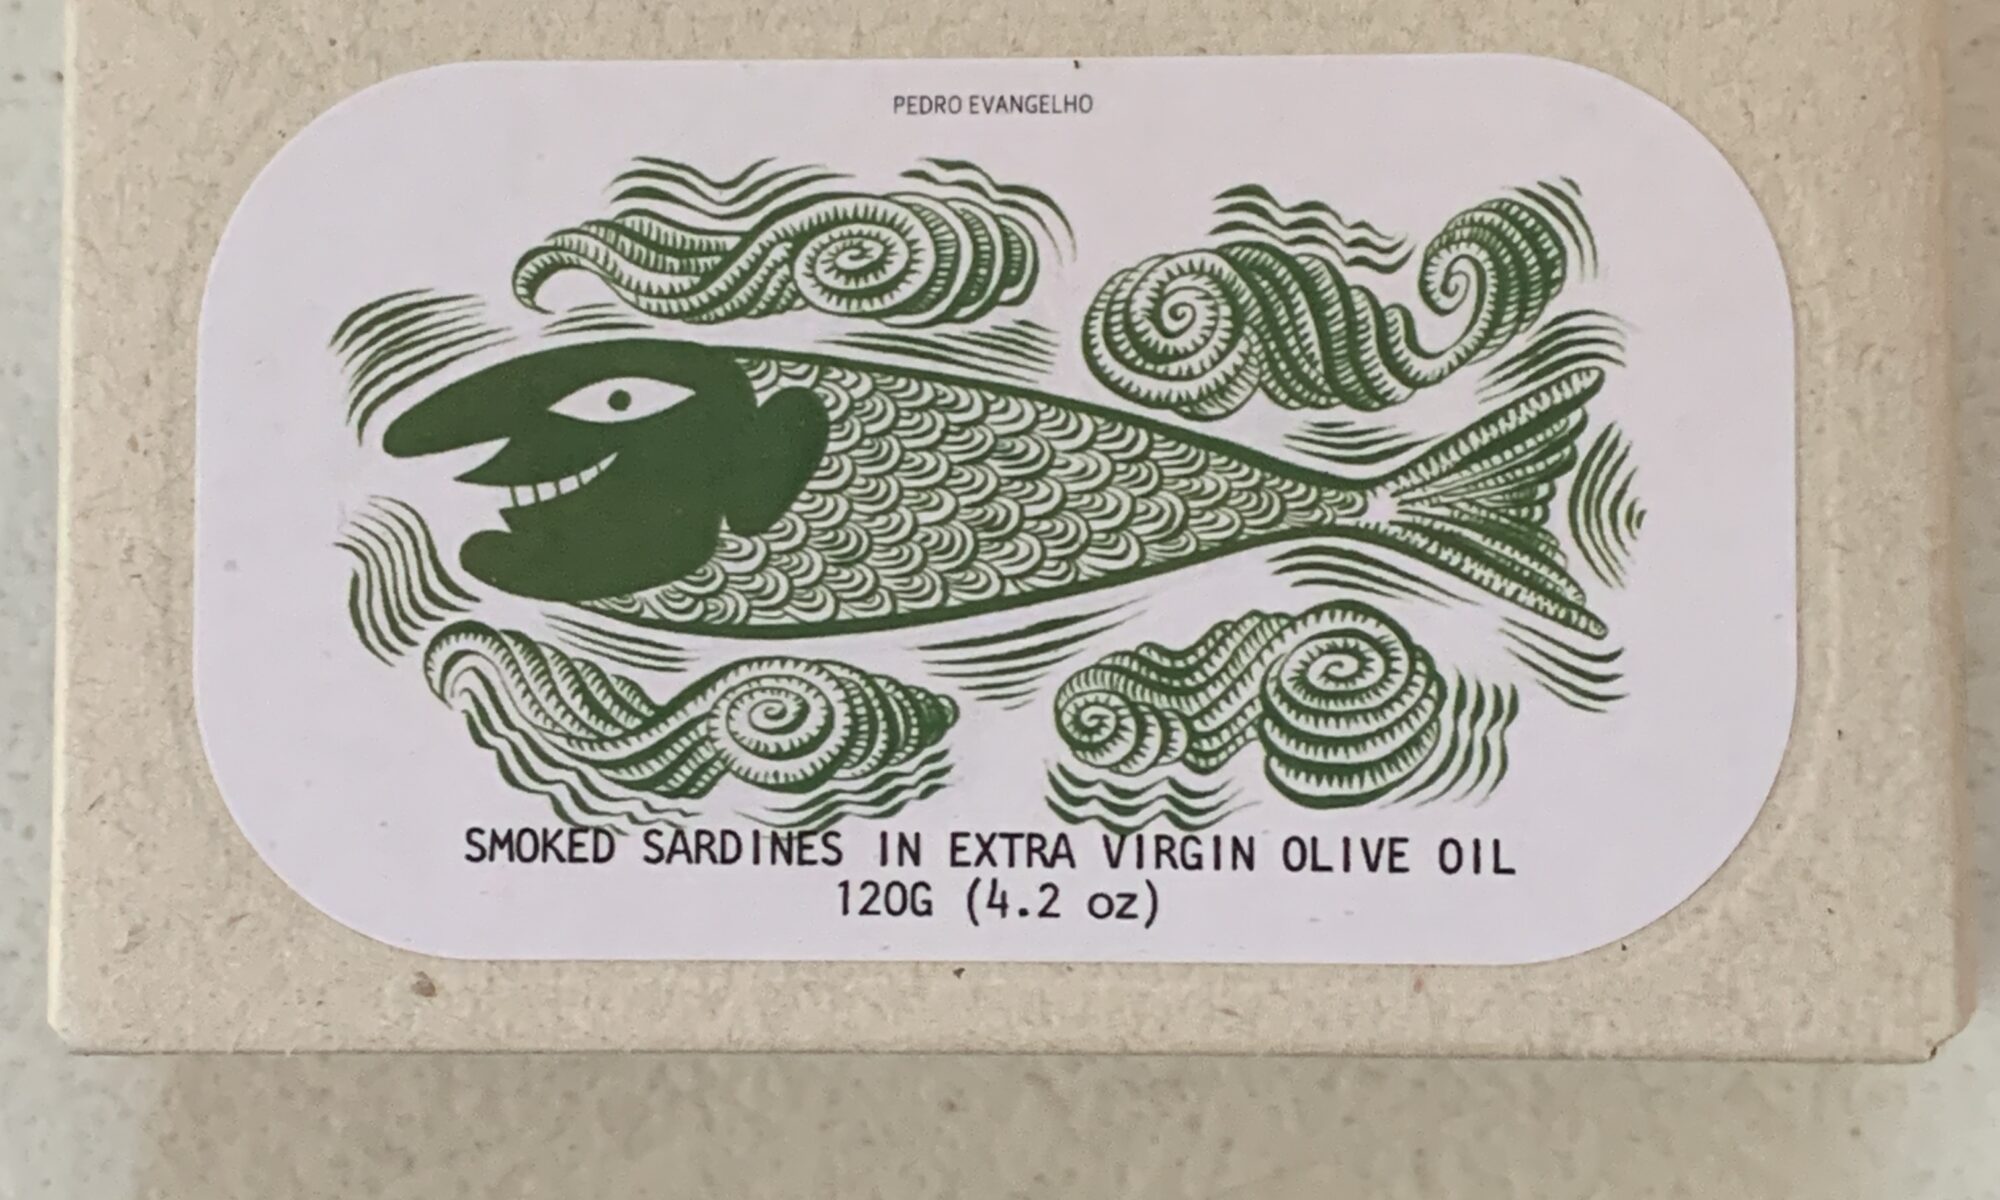 Image of the front of a package of José Gourmet Smoked Sardines in Extra Virgin Olive Oil